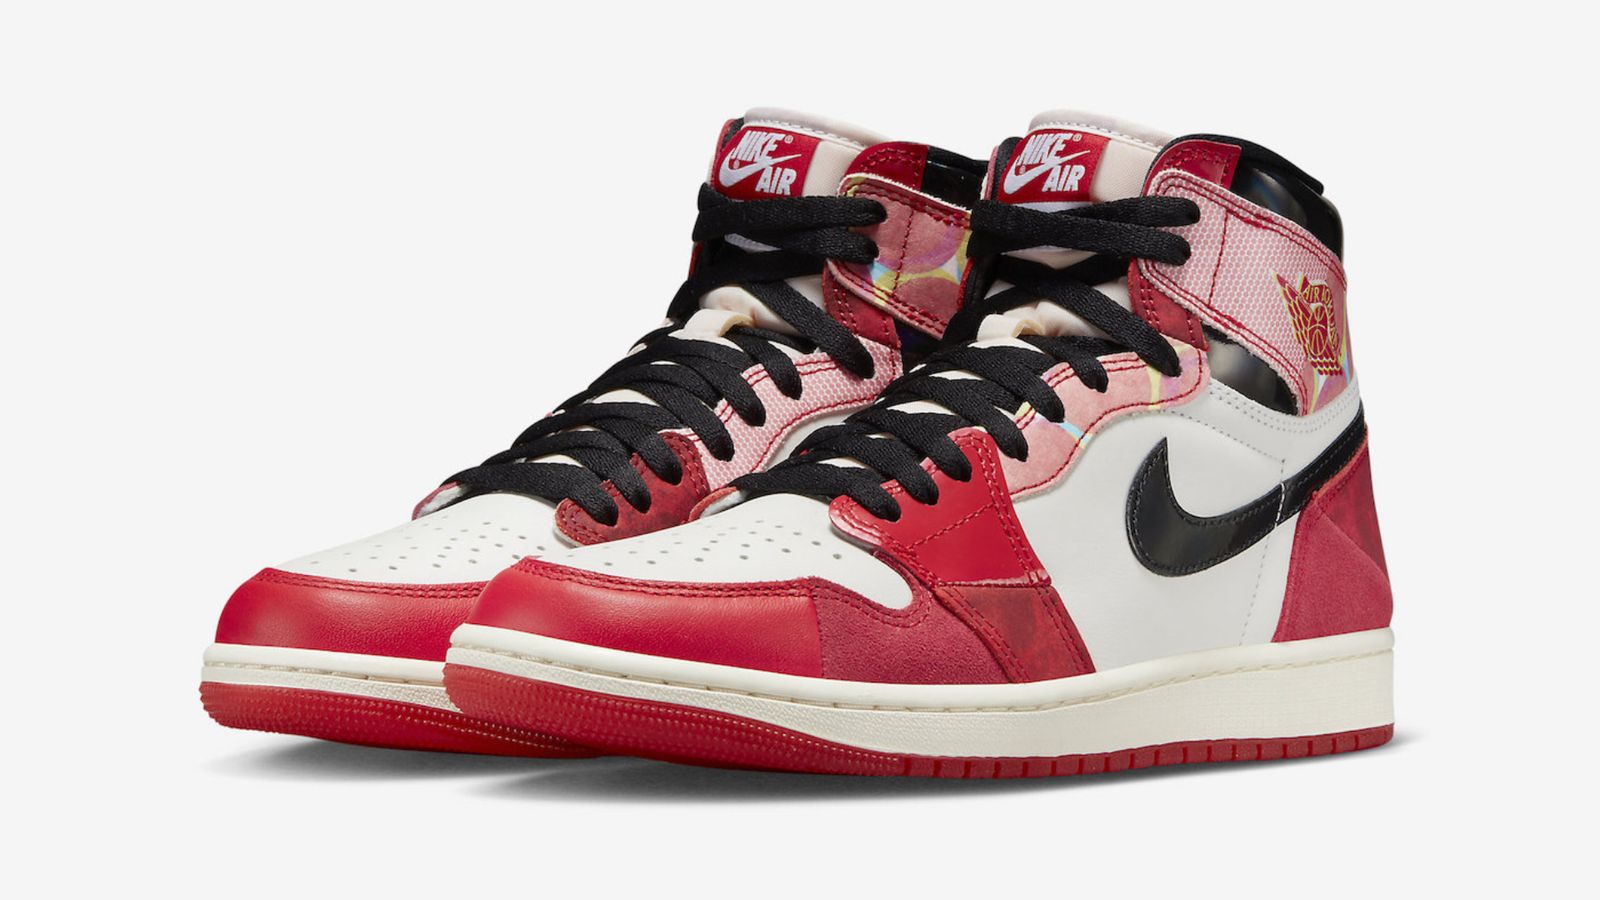 Air Jordan 1 High "Next Chapter" product image of a red, white, and black pair of high-tops made of different materials.